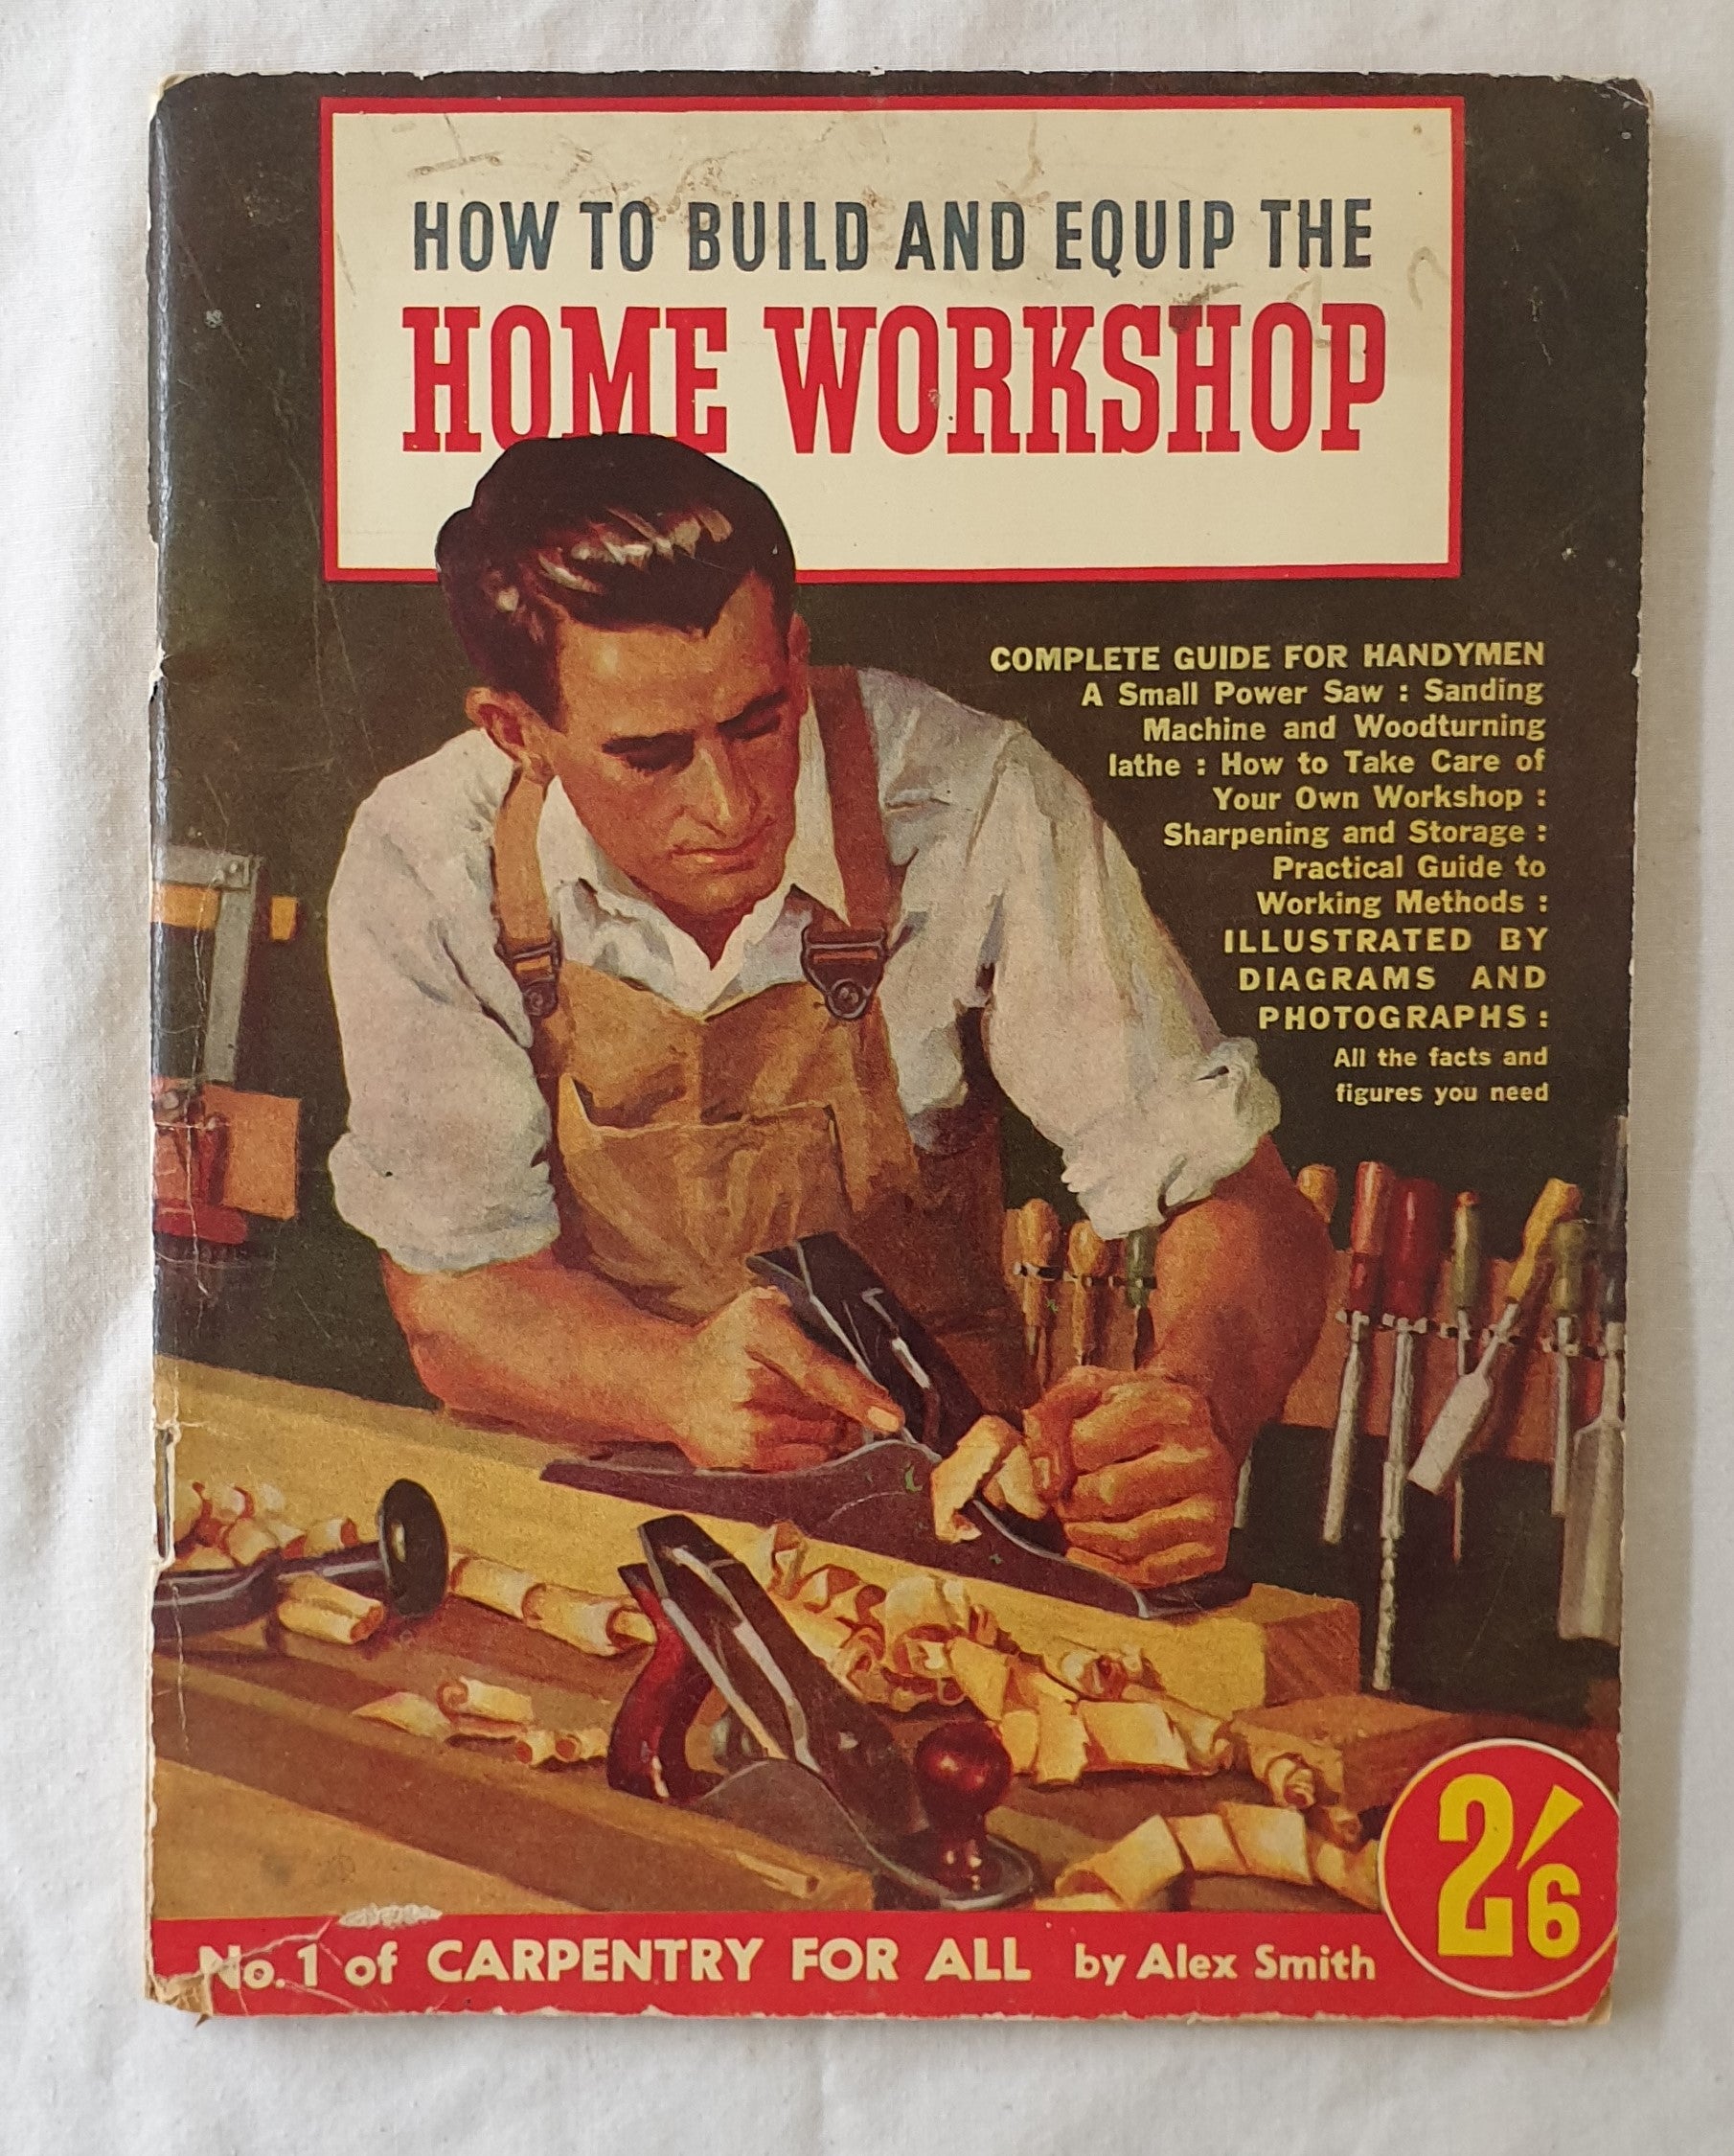 How to Build and Equip the Home Workshop  No. 1 of Carpentry for All  by Alex Smith